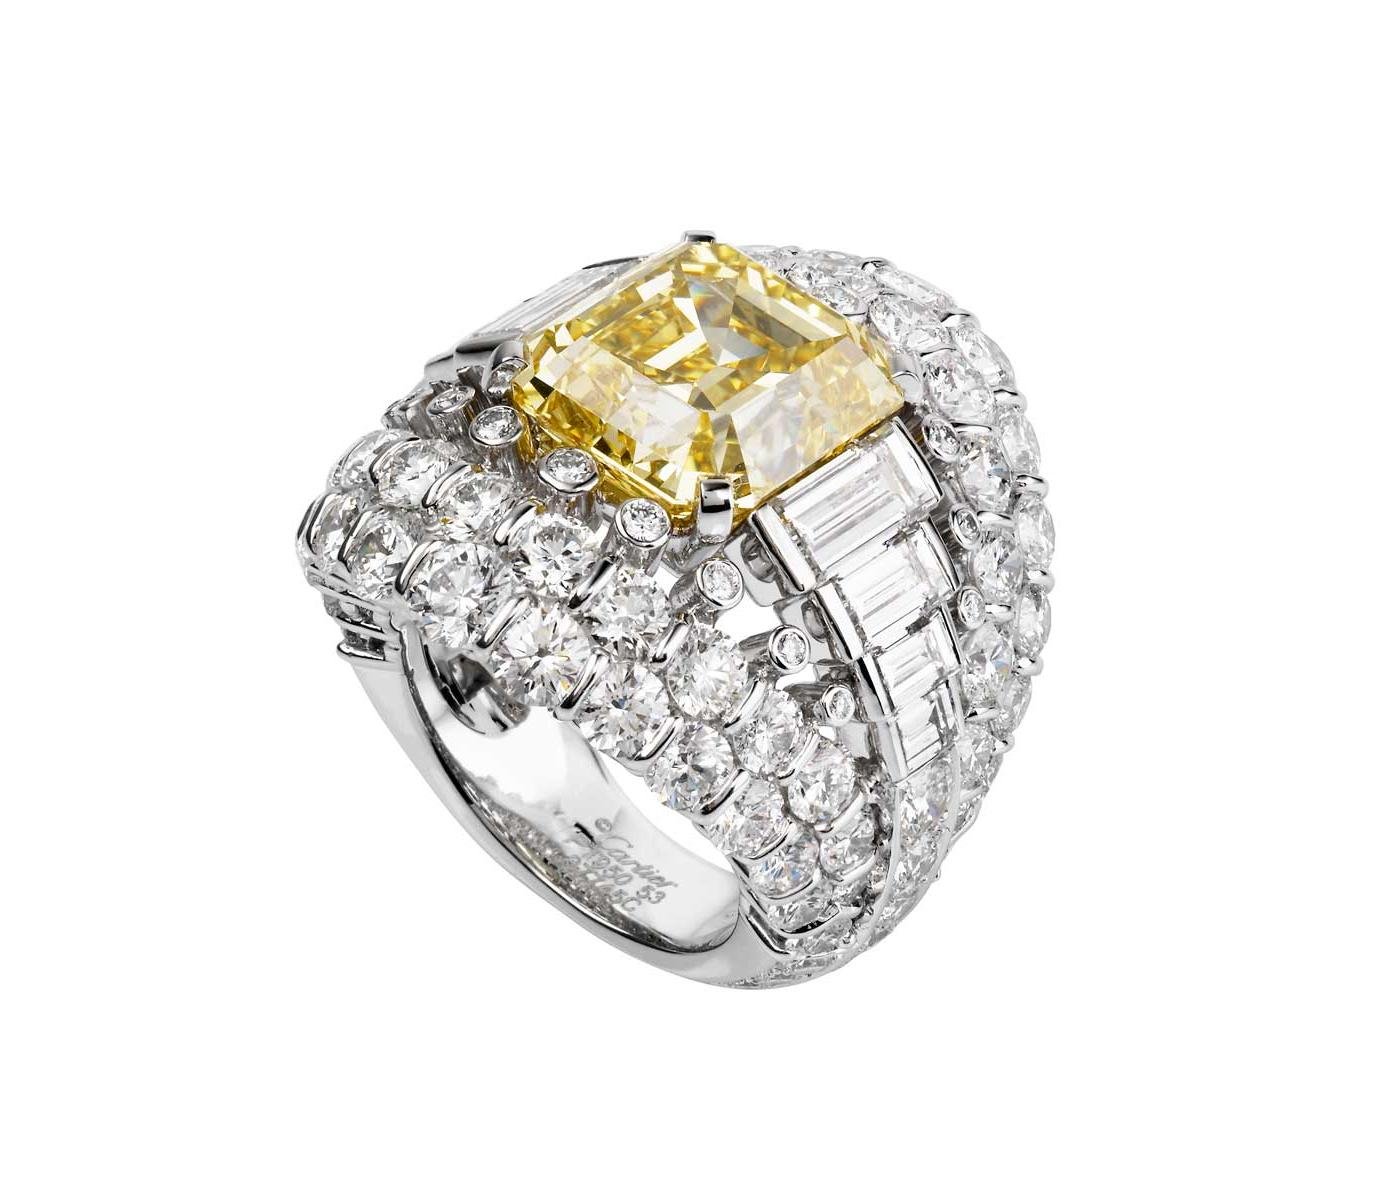 Ring by Cartier